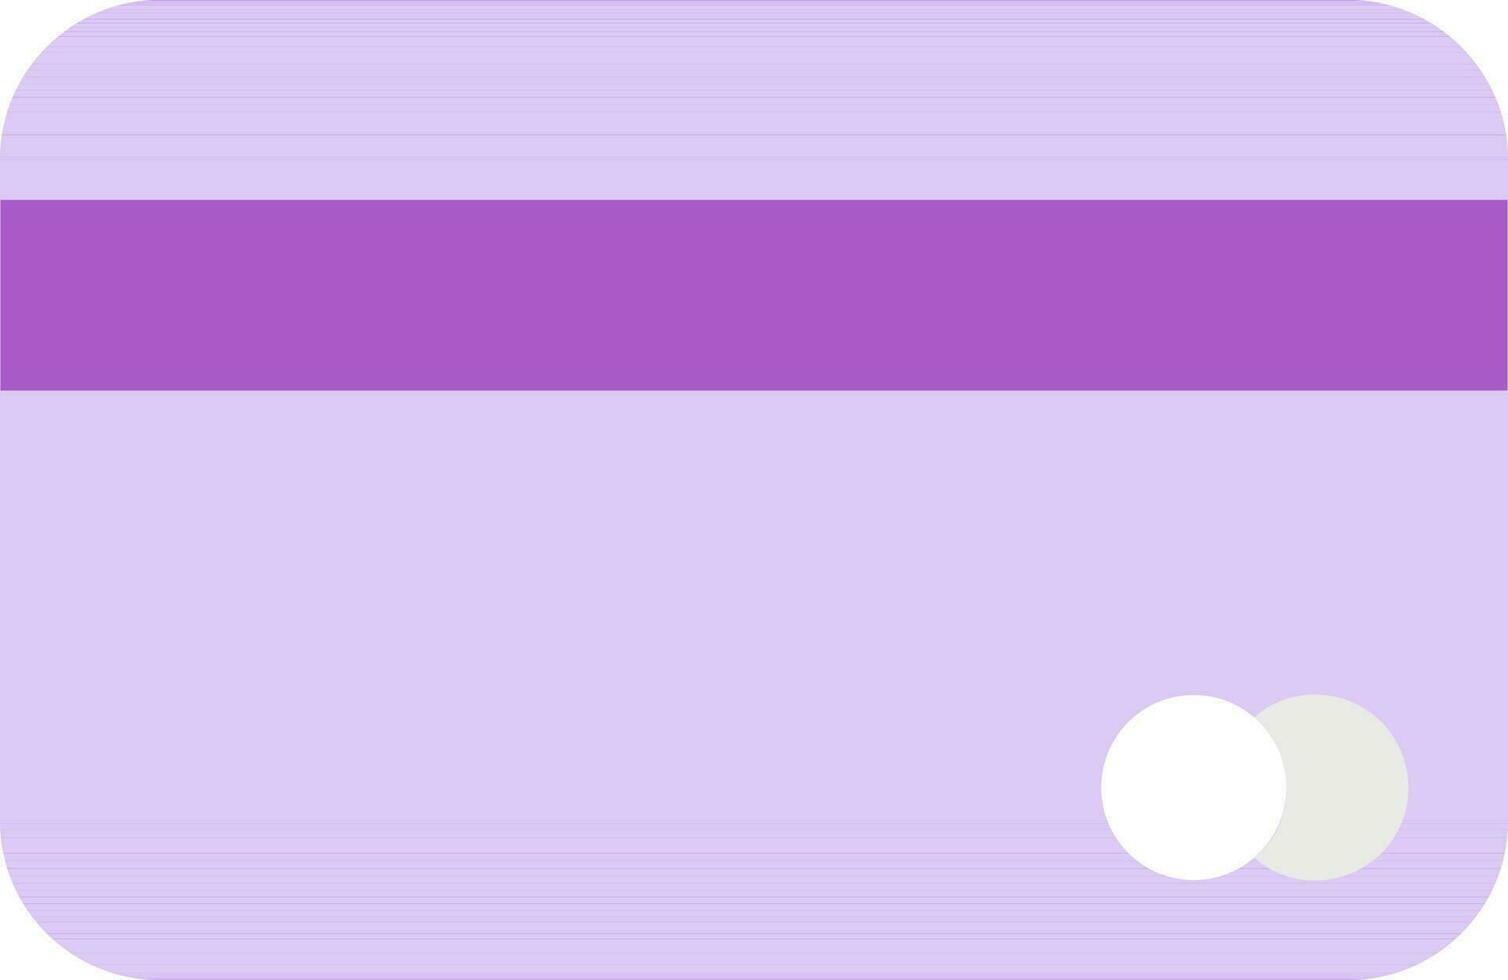 Flat Style Payment Card Icon in Purple Color. vector